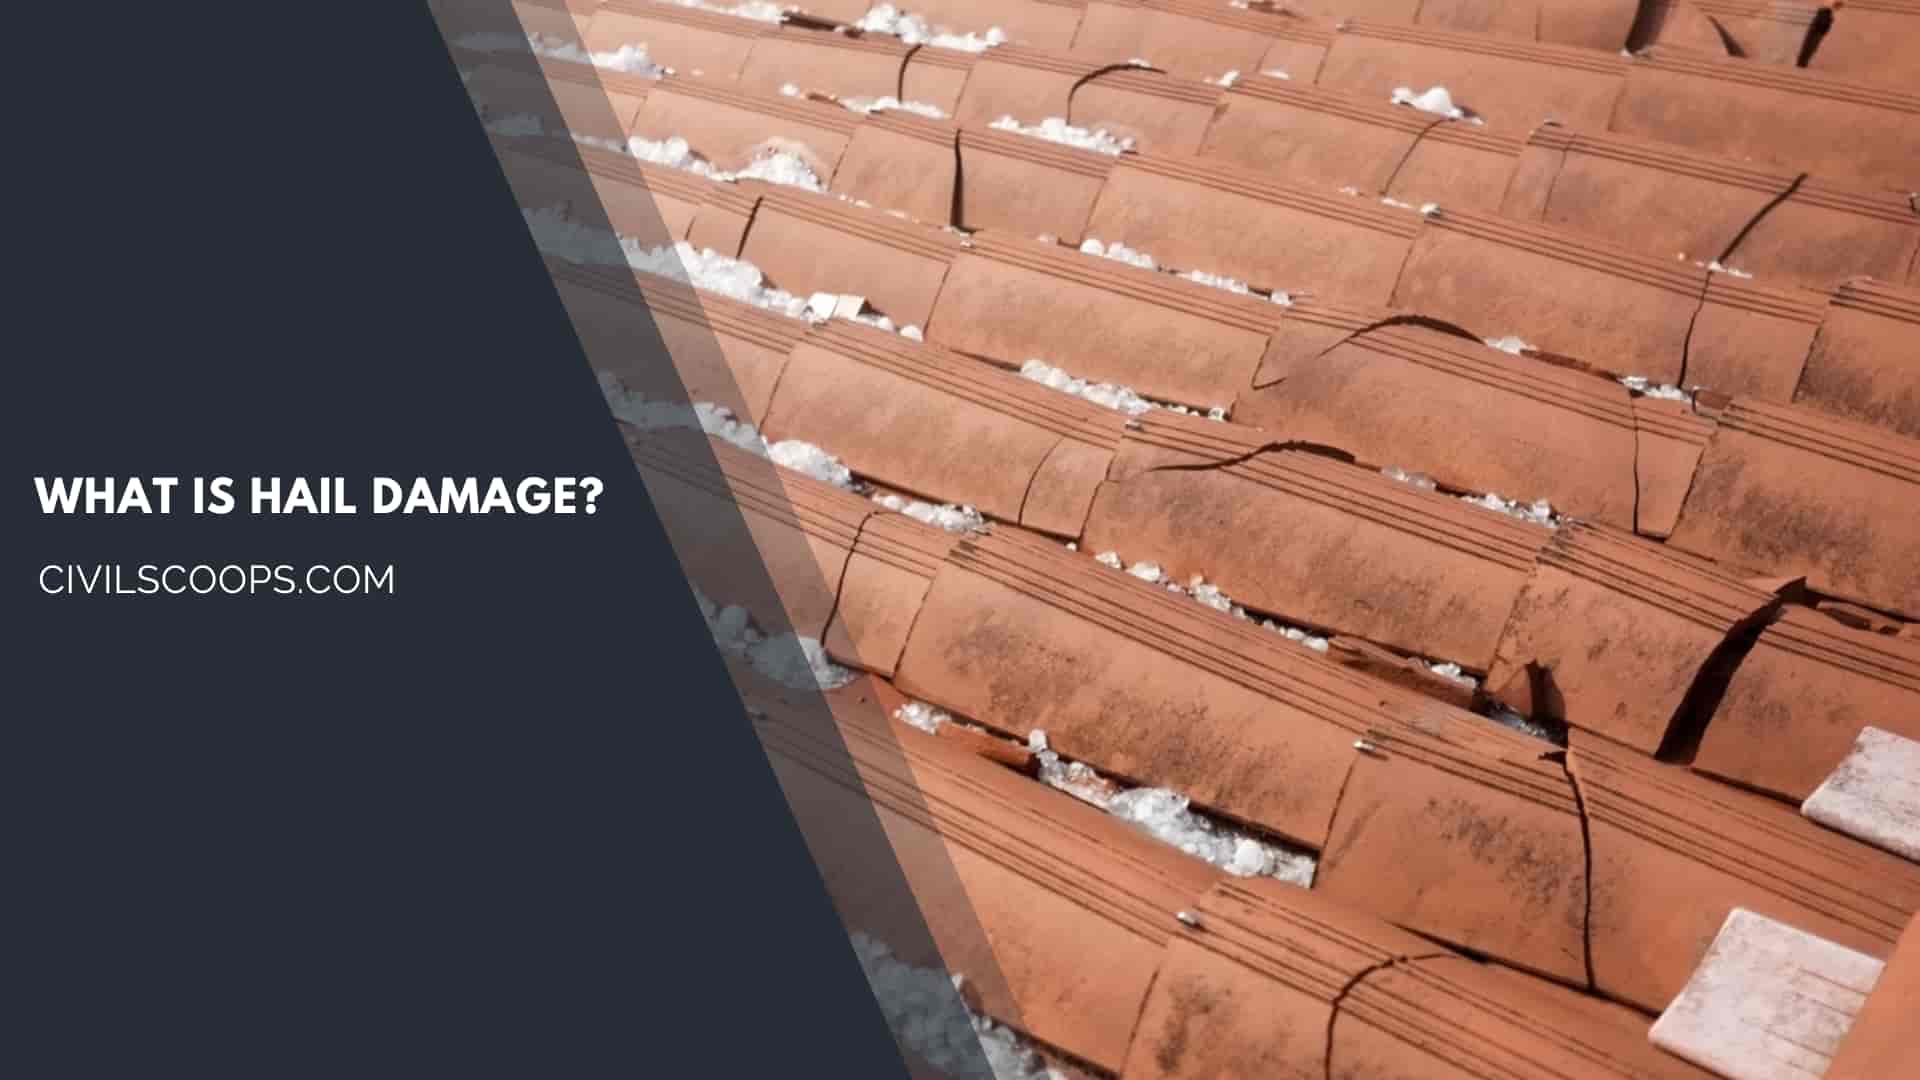 What Is Hail Damage?